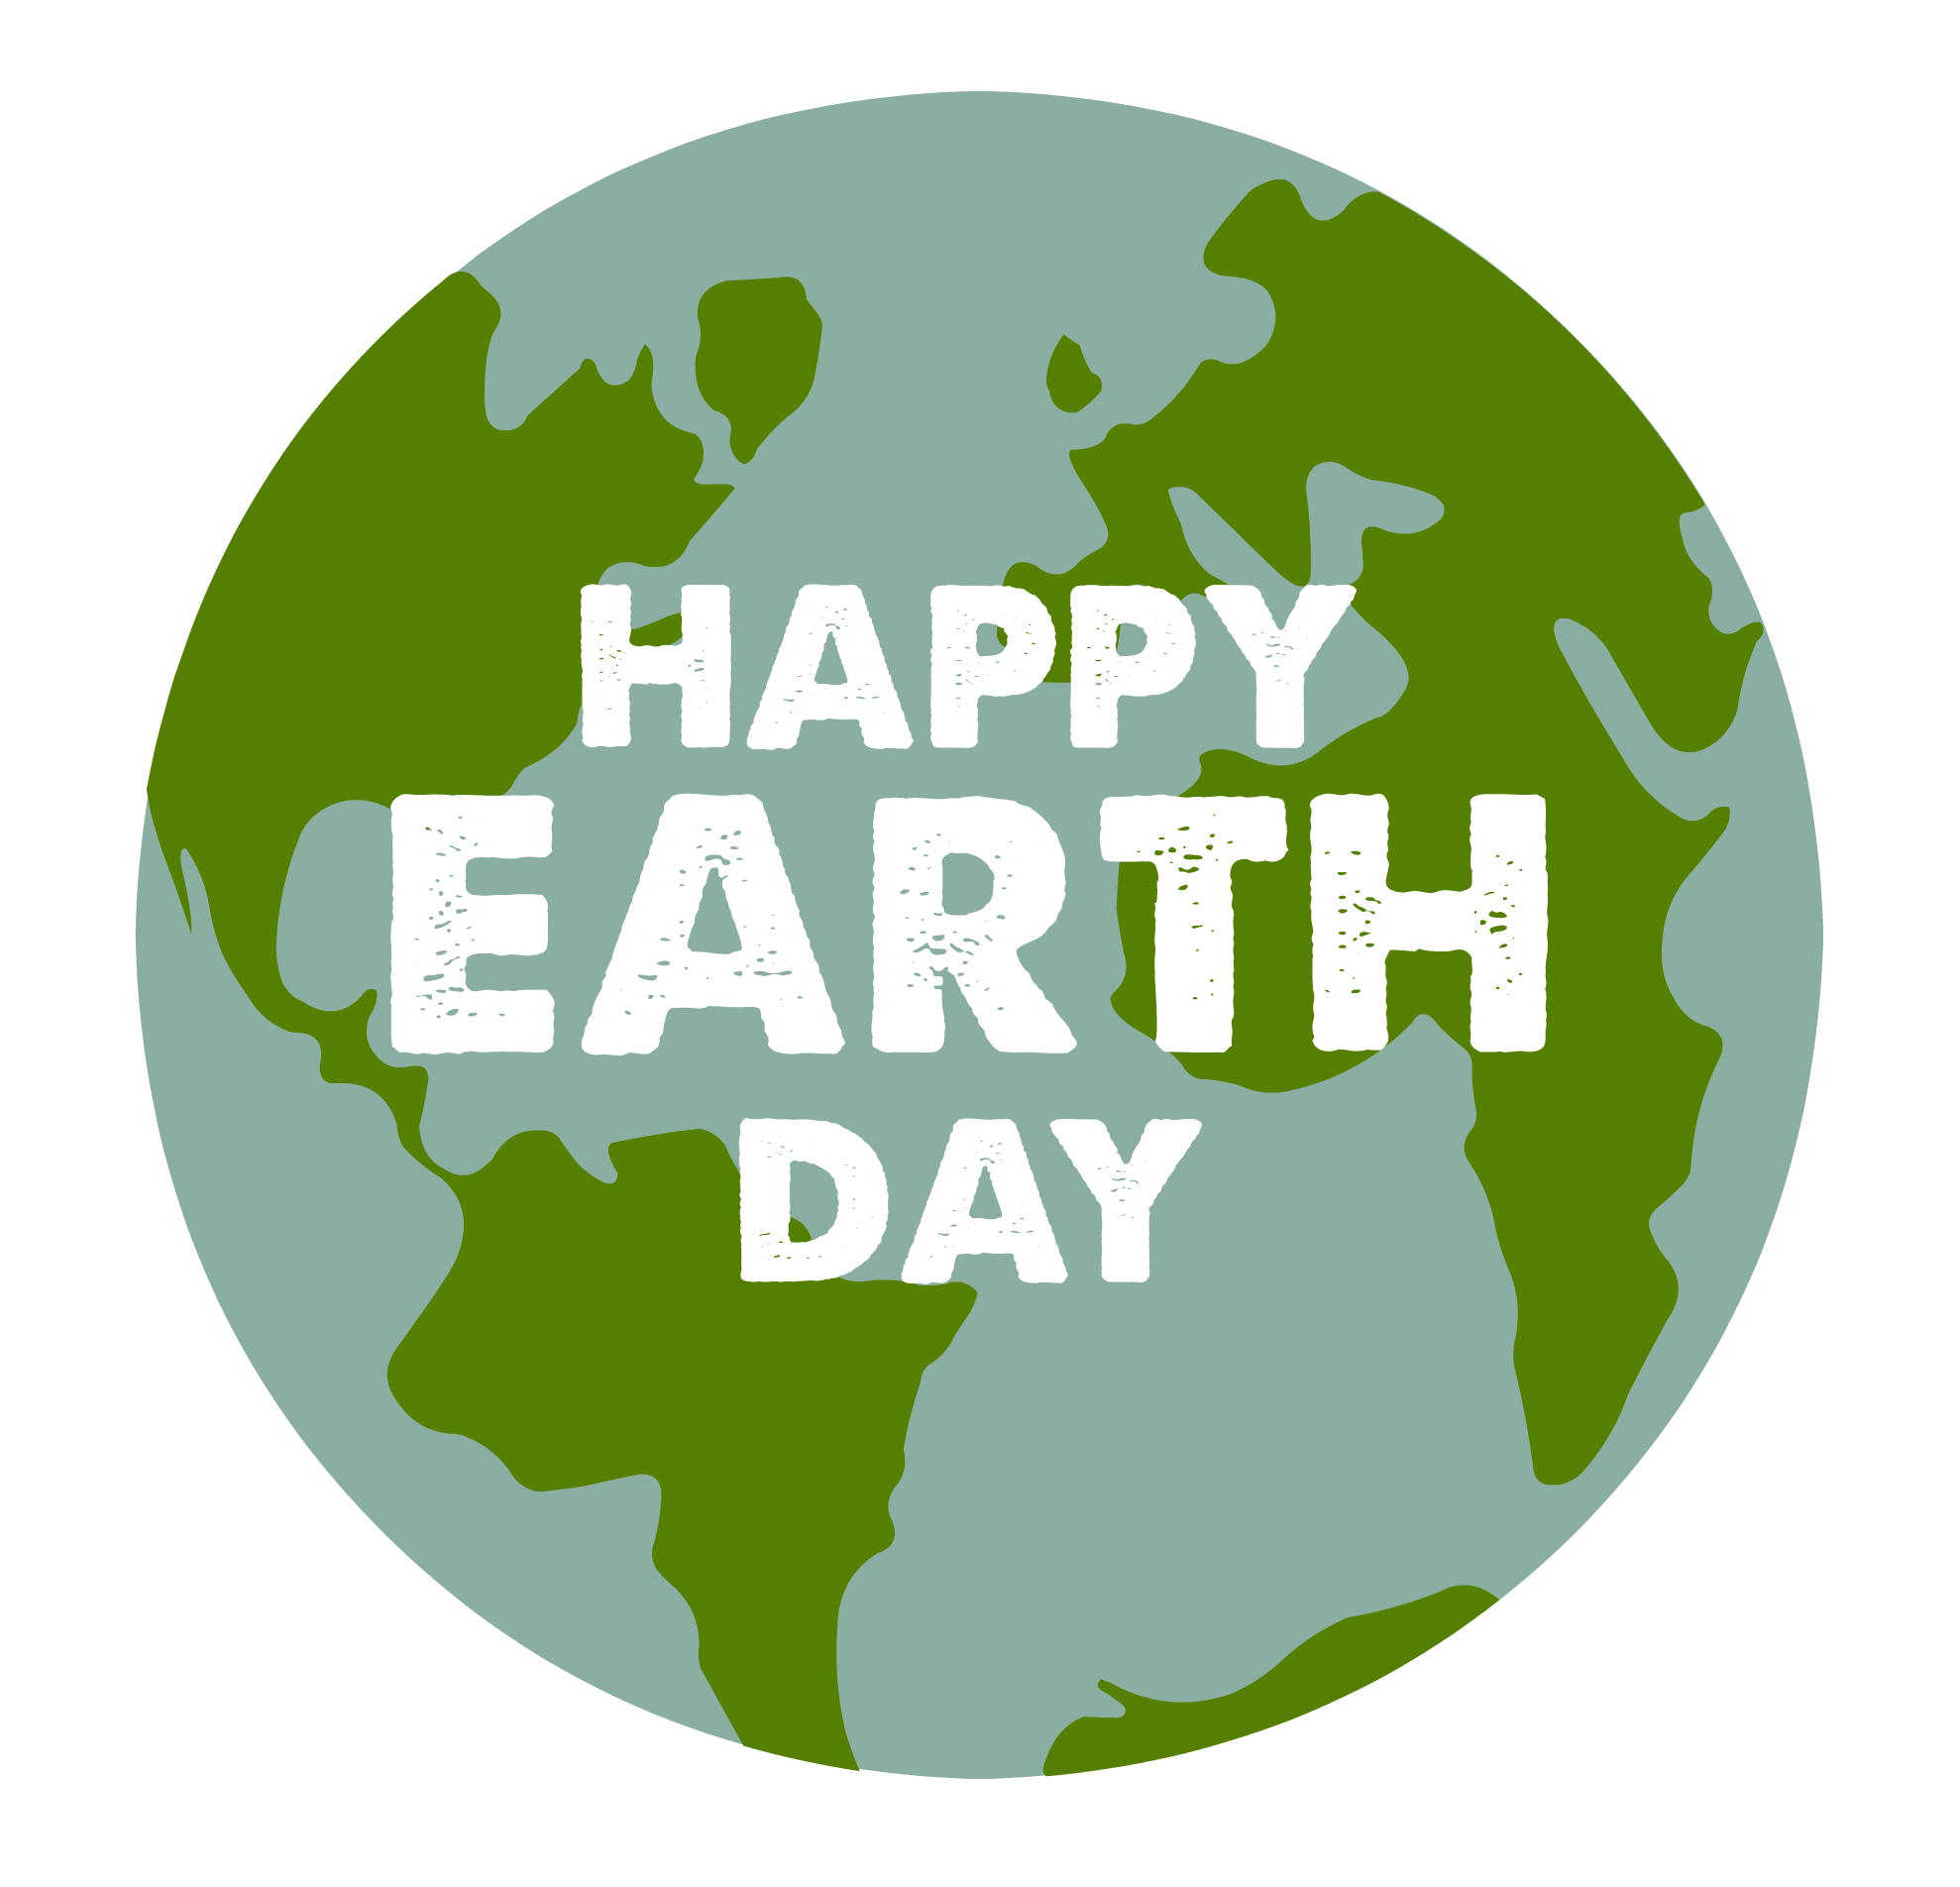 Earth Day Free PNG Image